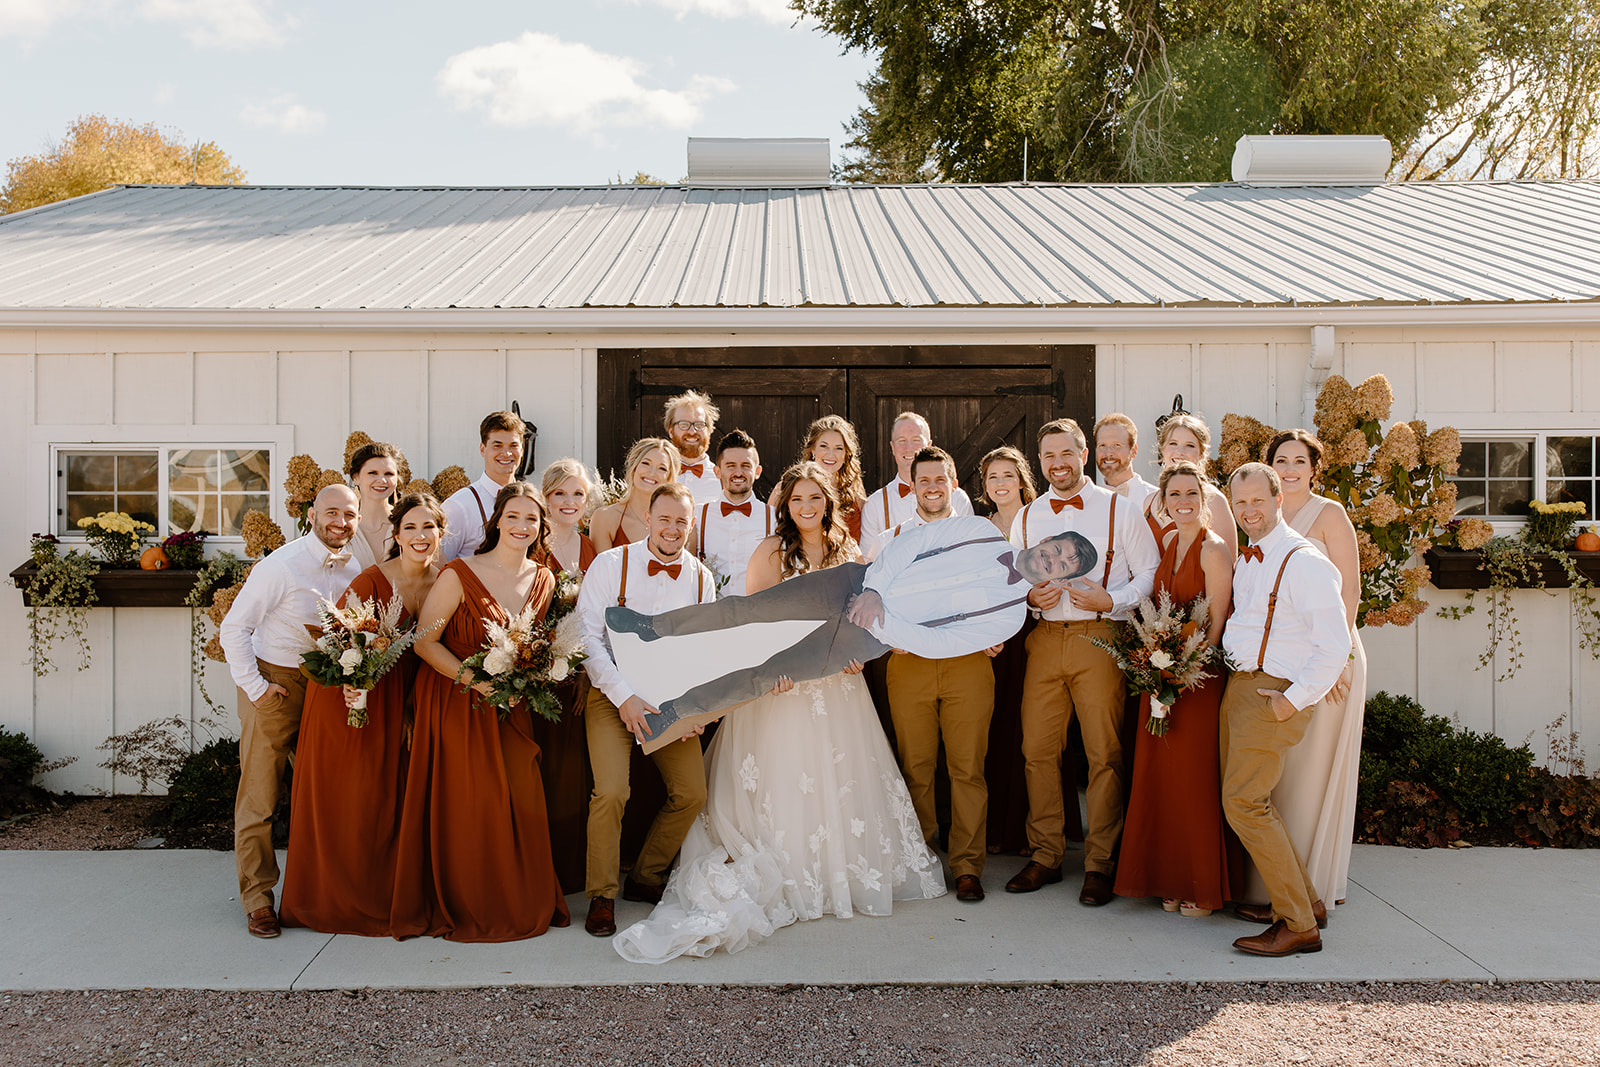 Wedding party hold up a cardboard cut out of a groomsmen